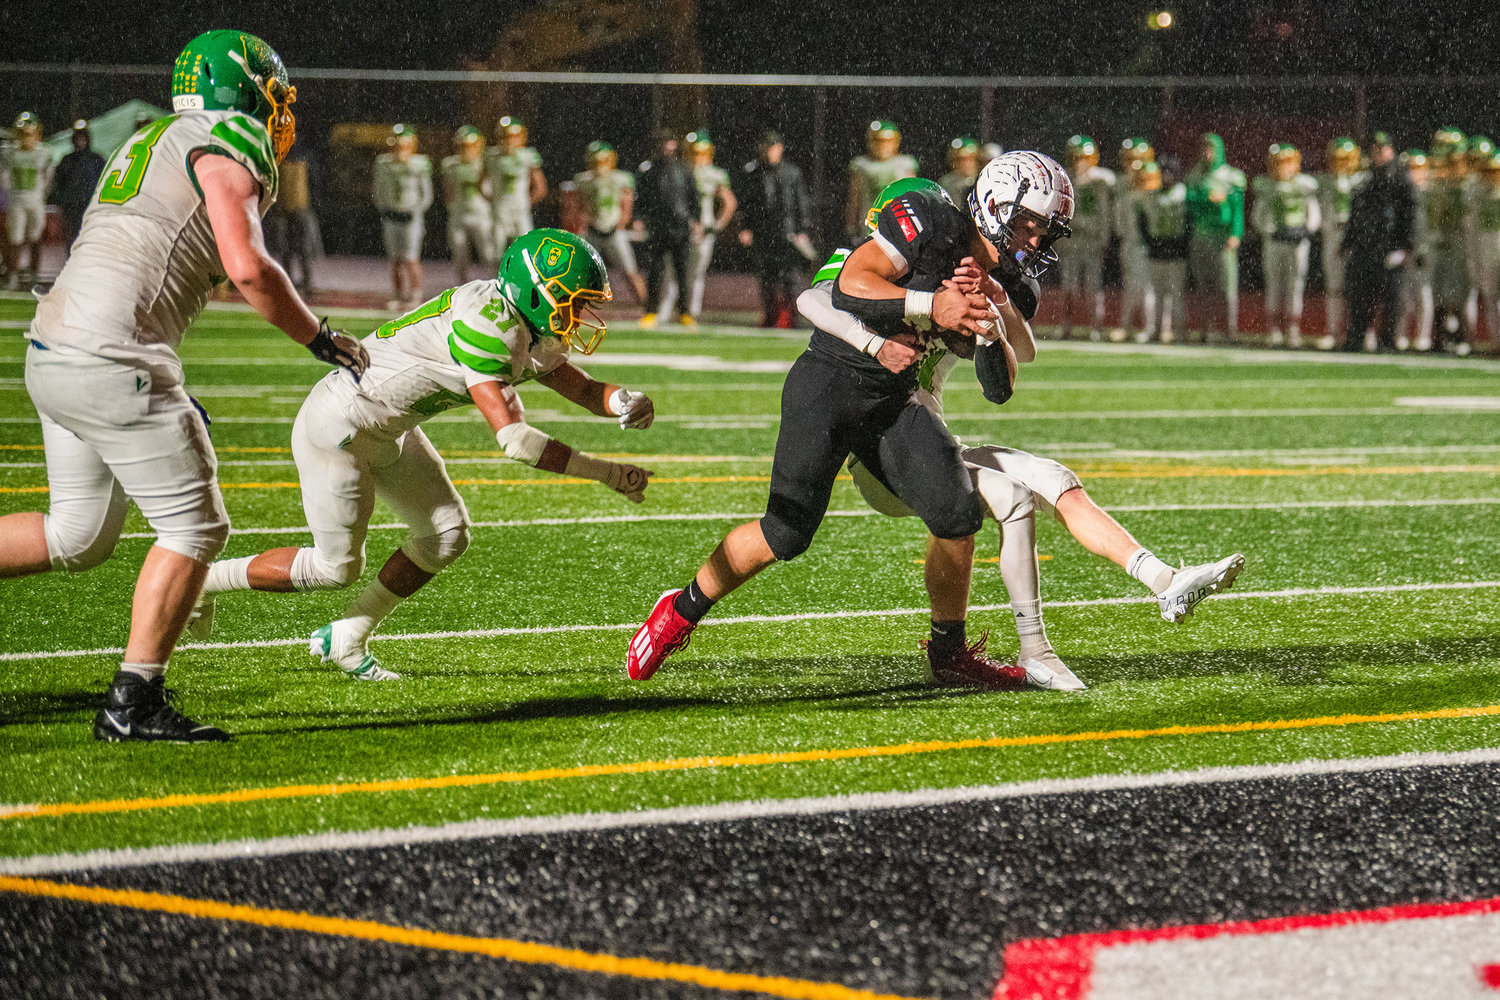 Yelm senior William Carreto (30) blasts through defenders with the football for a touchdown Friday night.